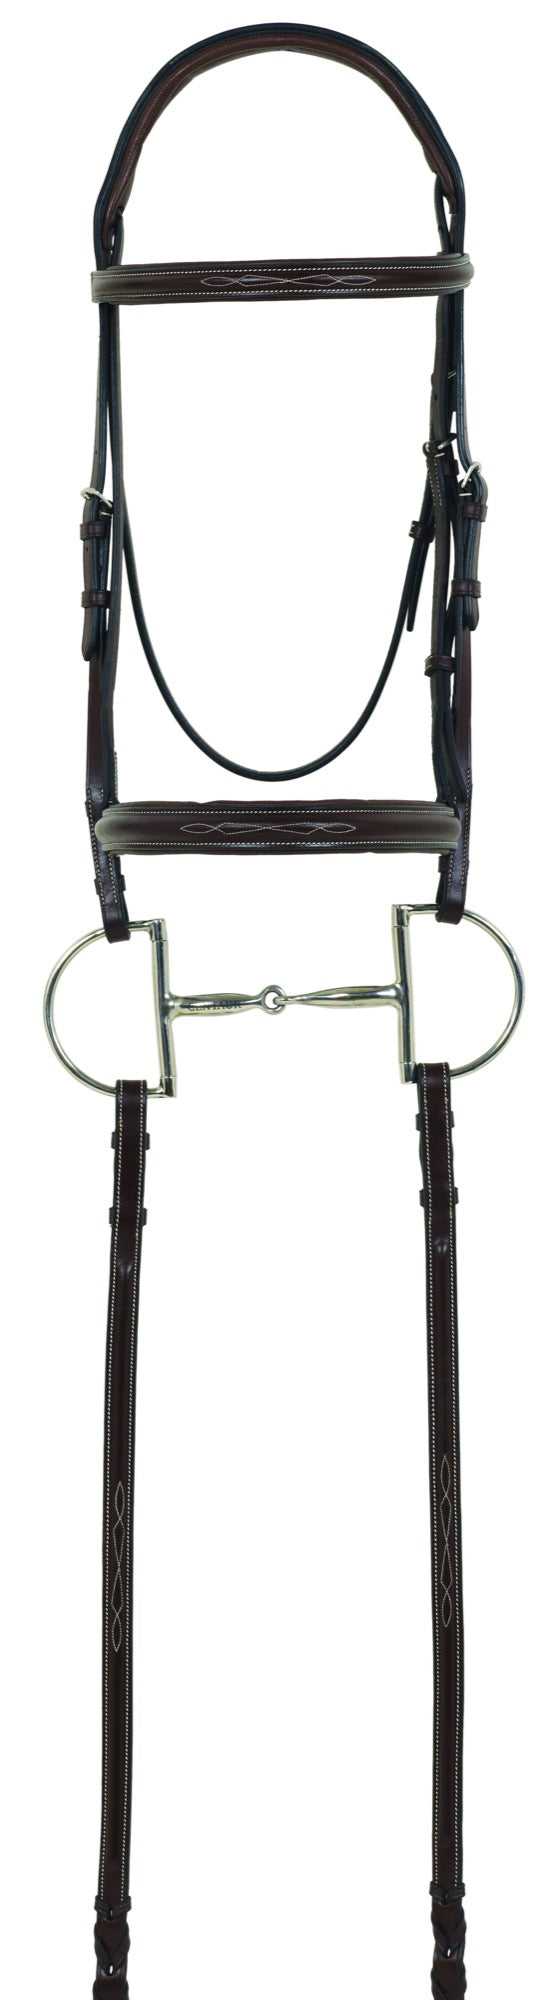 Brown leather english bridle with a D-ring snaffle bit. The bridle has some fancy stitching on the noseband and  broadband.